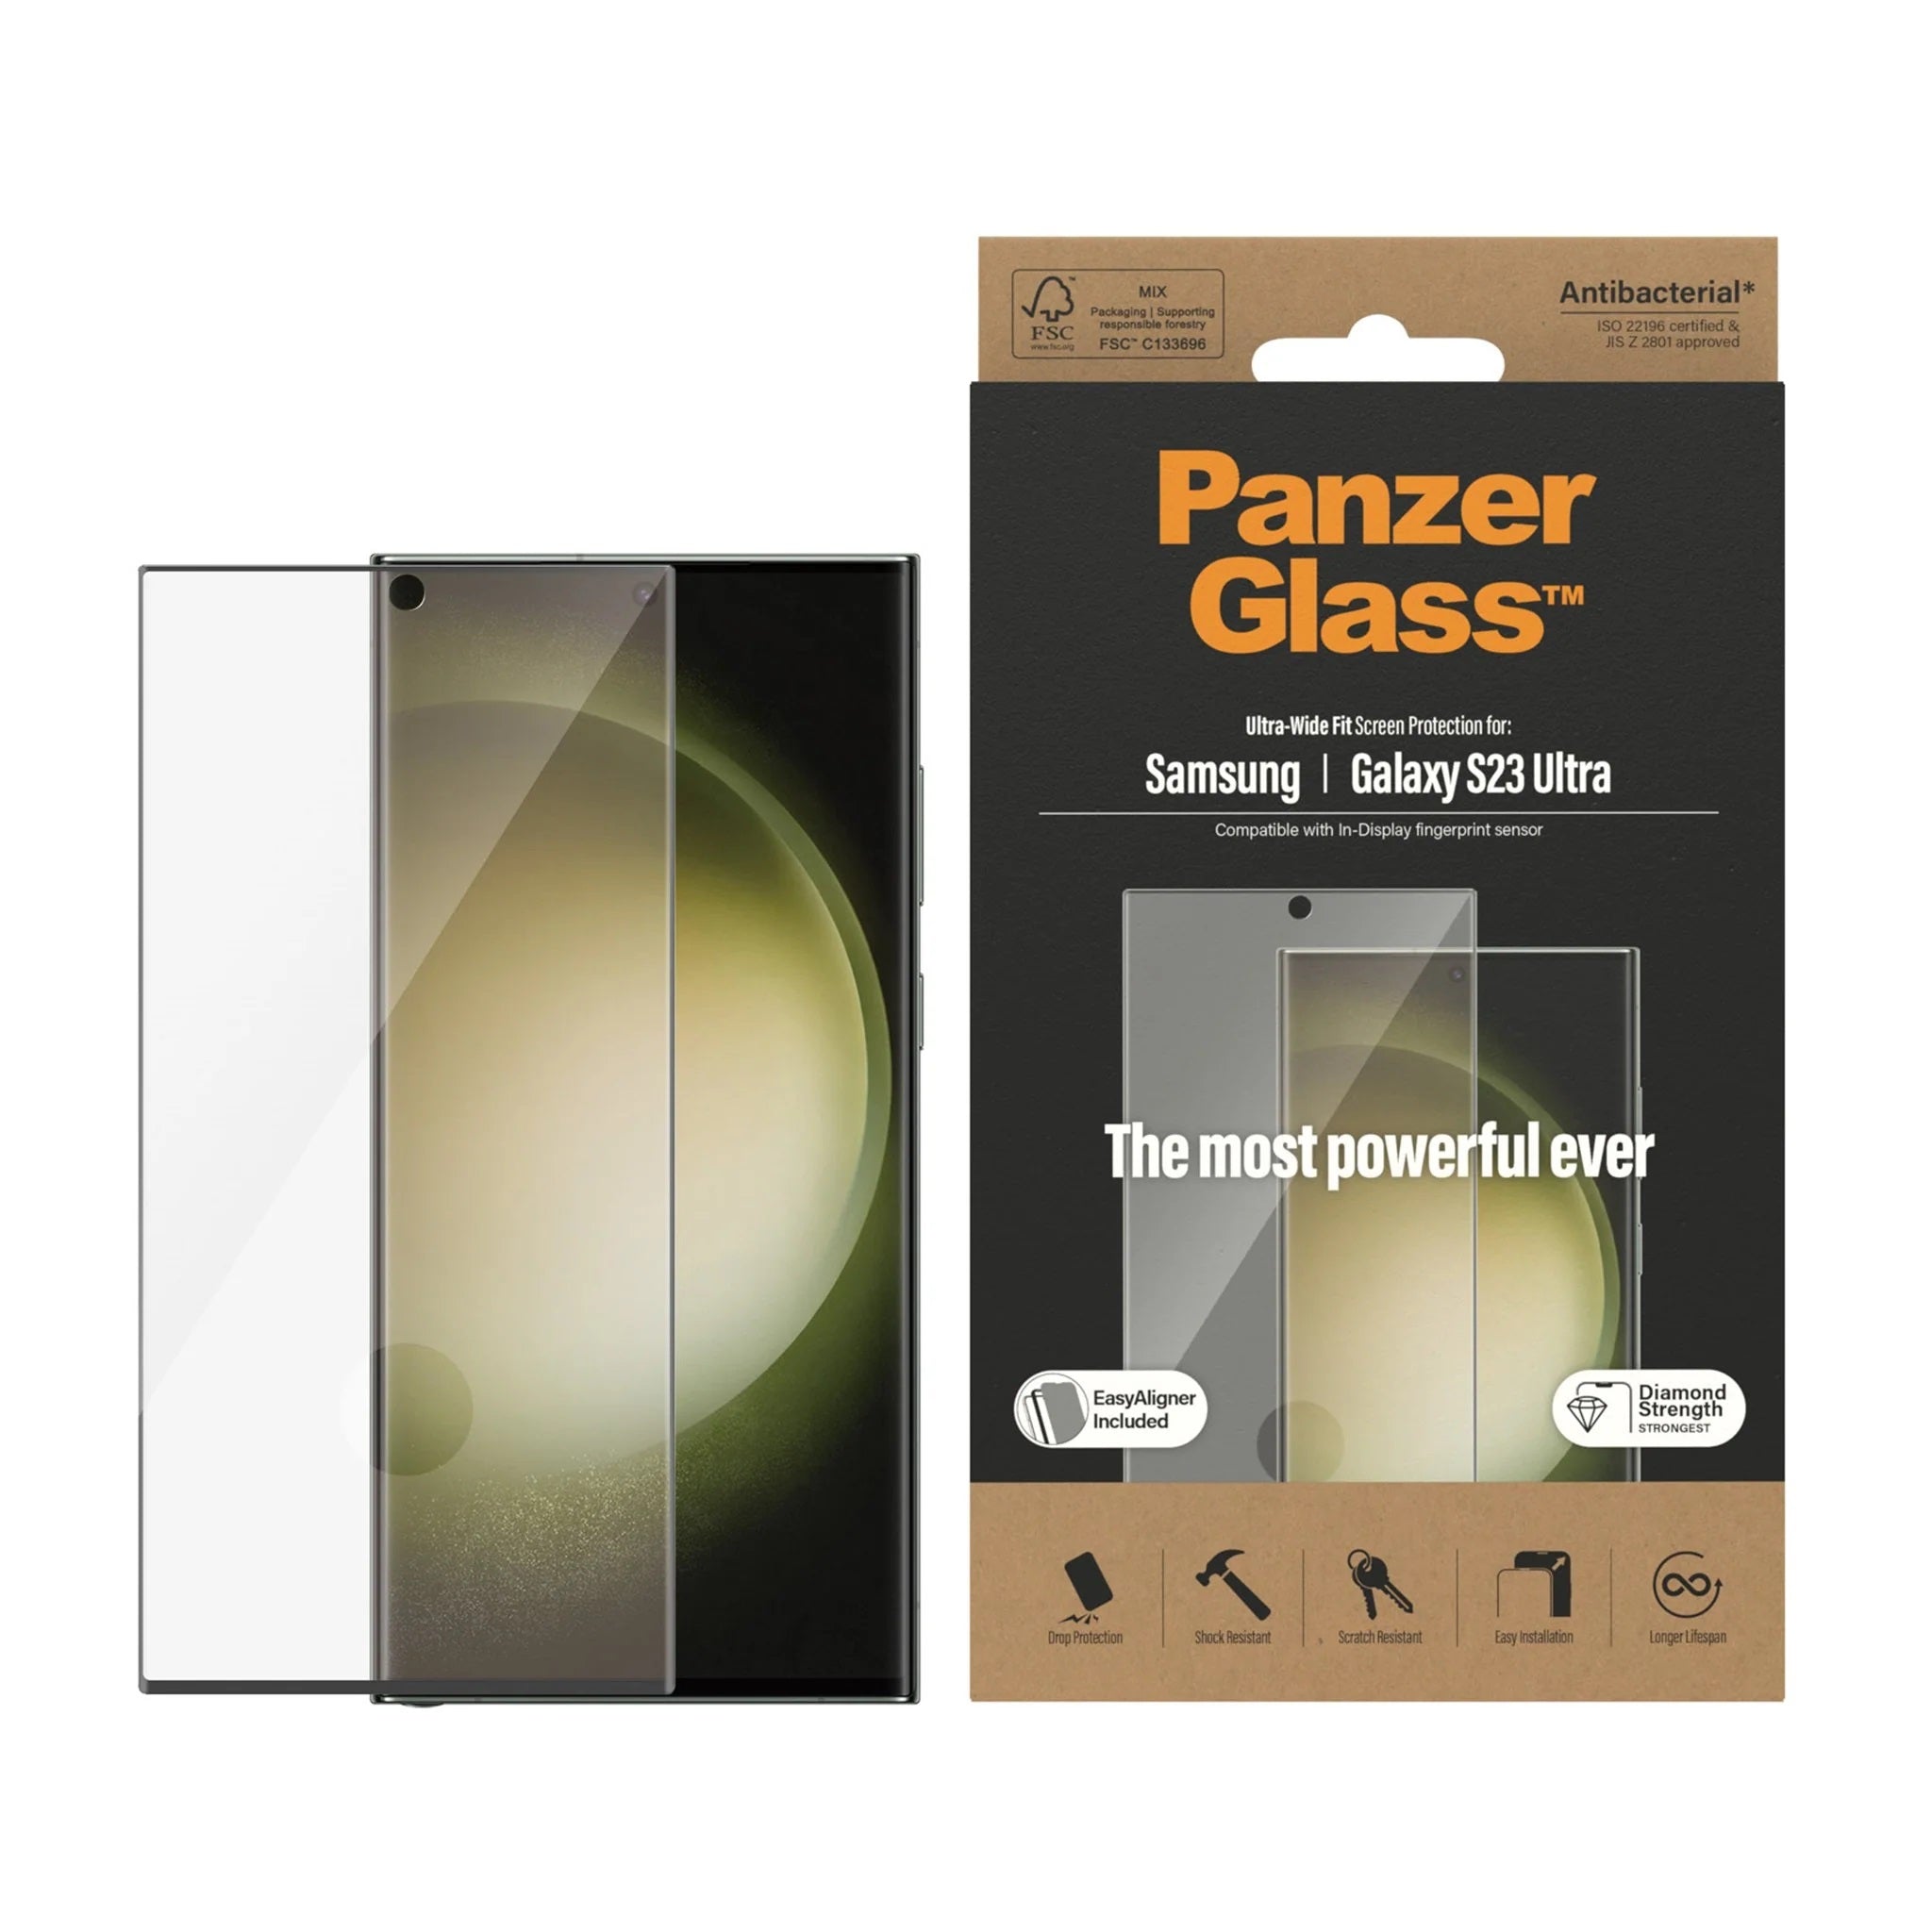 PanzerGlass™ Ultra-Wide fit with EasyAligner Screen Protector for Samsung Galaxy S23 Ultra.